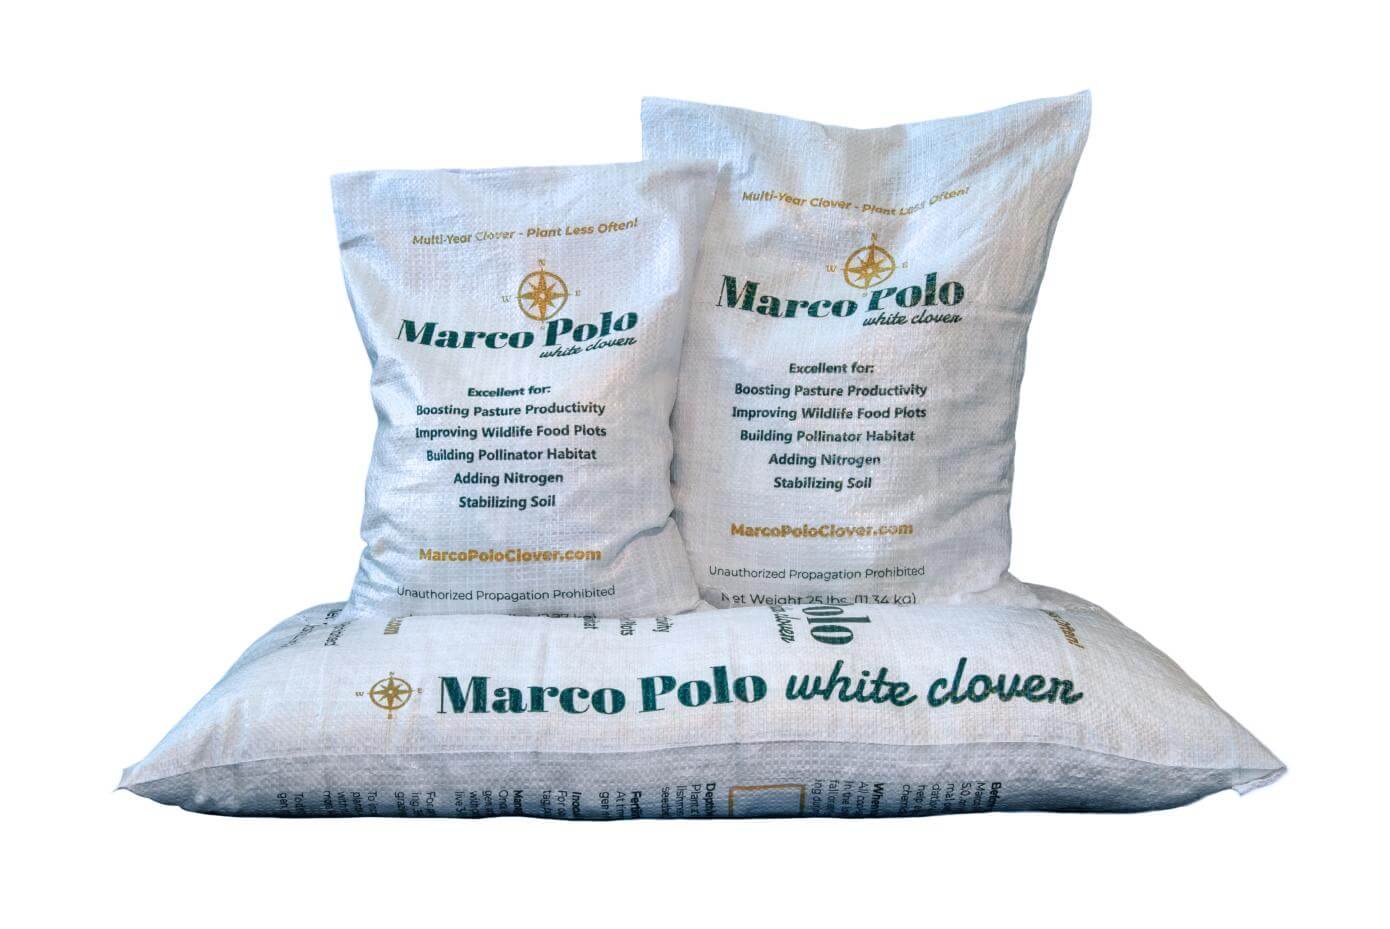 Marco Polo white clover bags in 5lb, 25lb and 50lb bags.